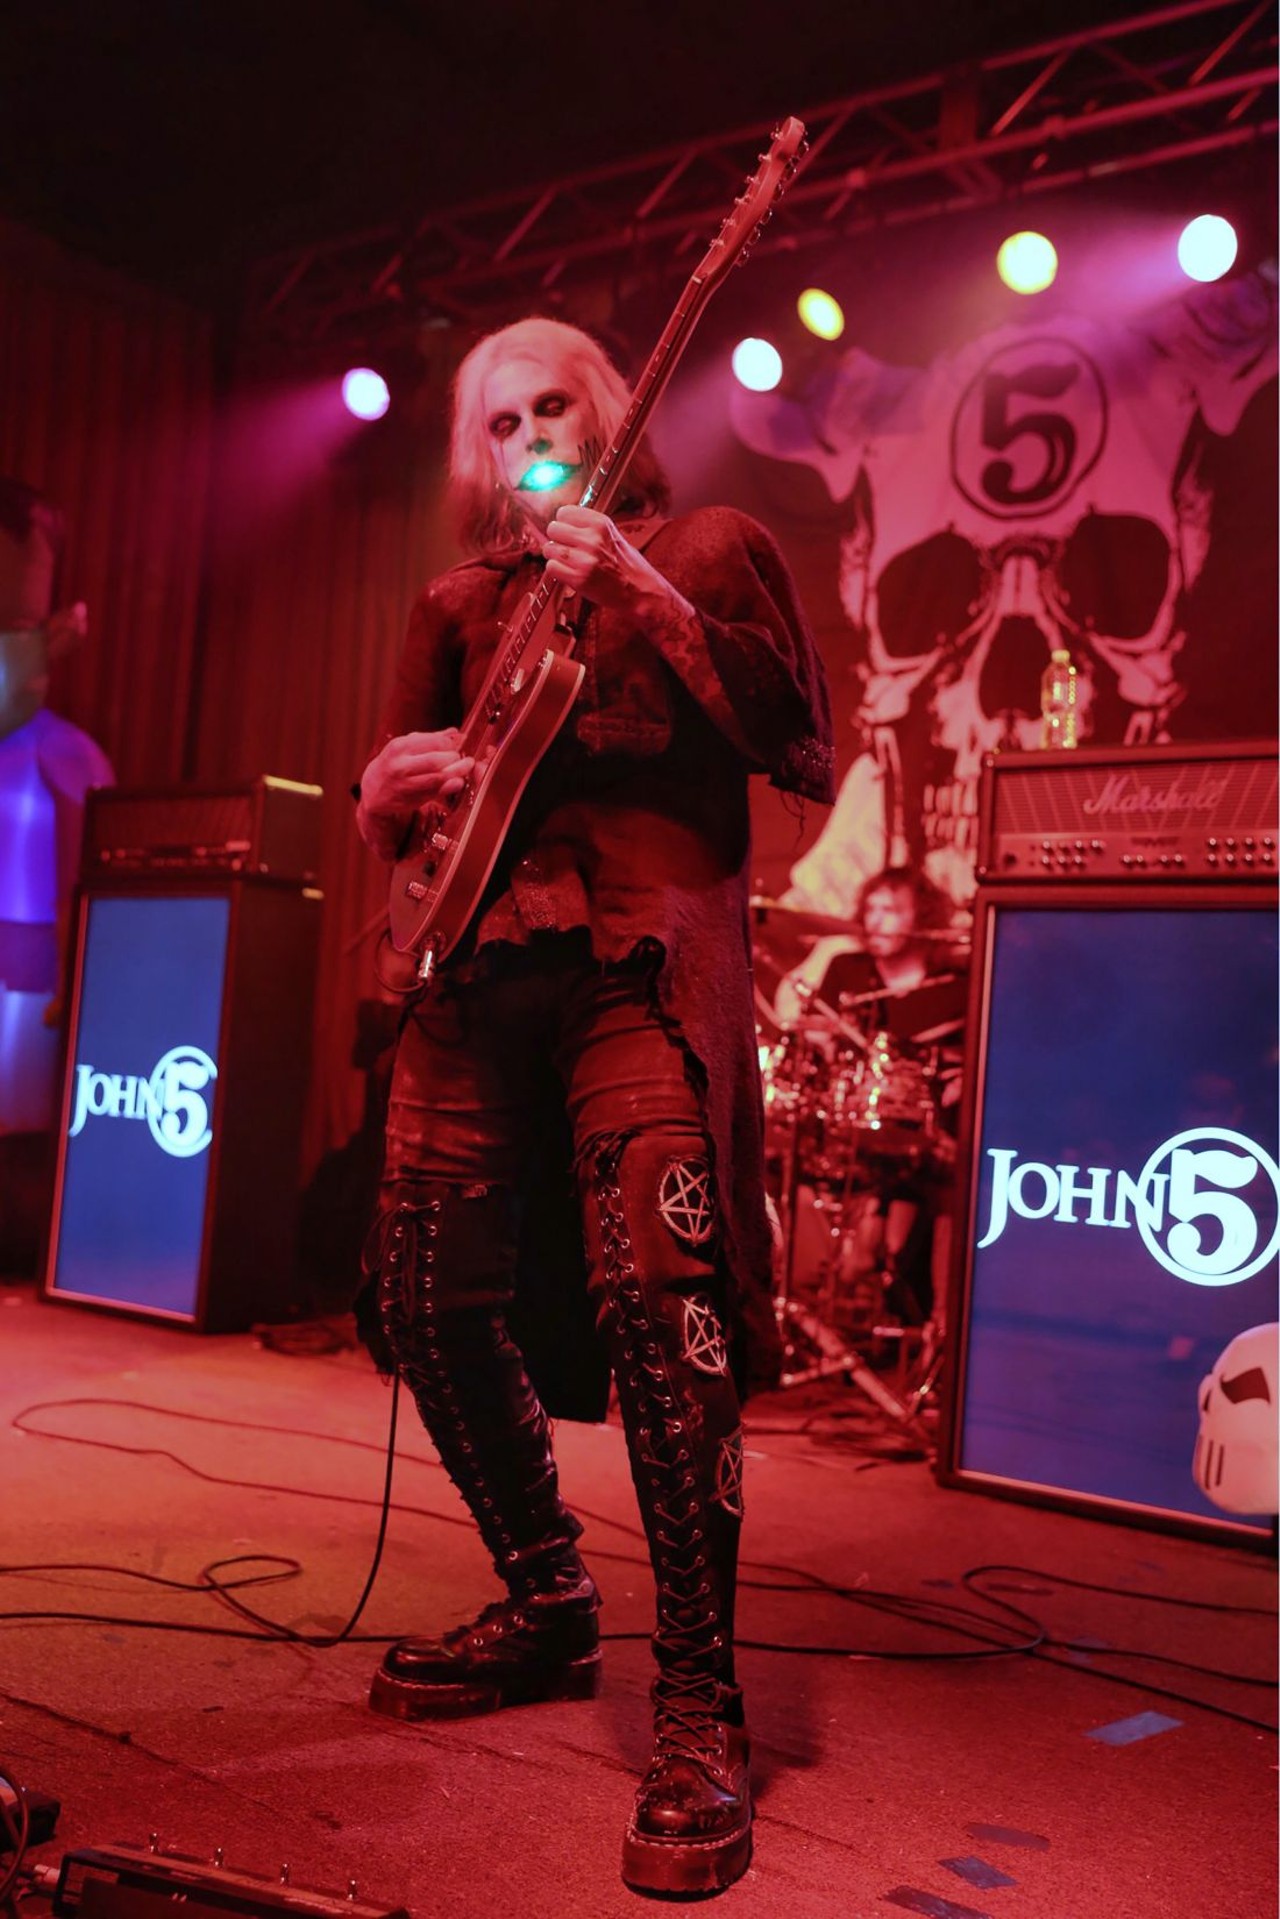 John 5 and the Creatures Performing at the Beachland